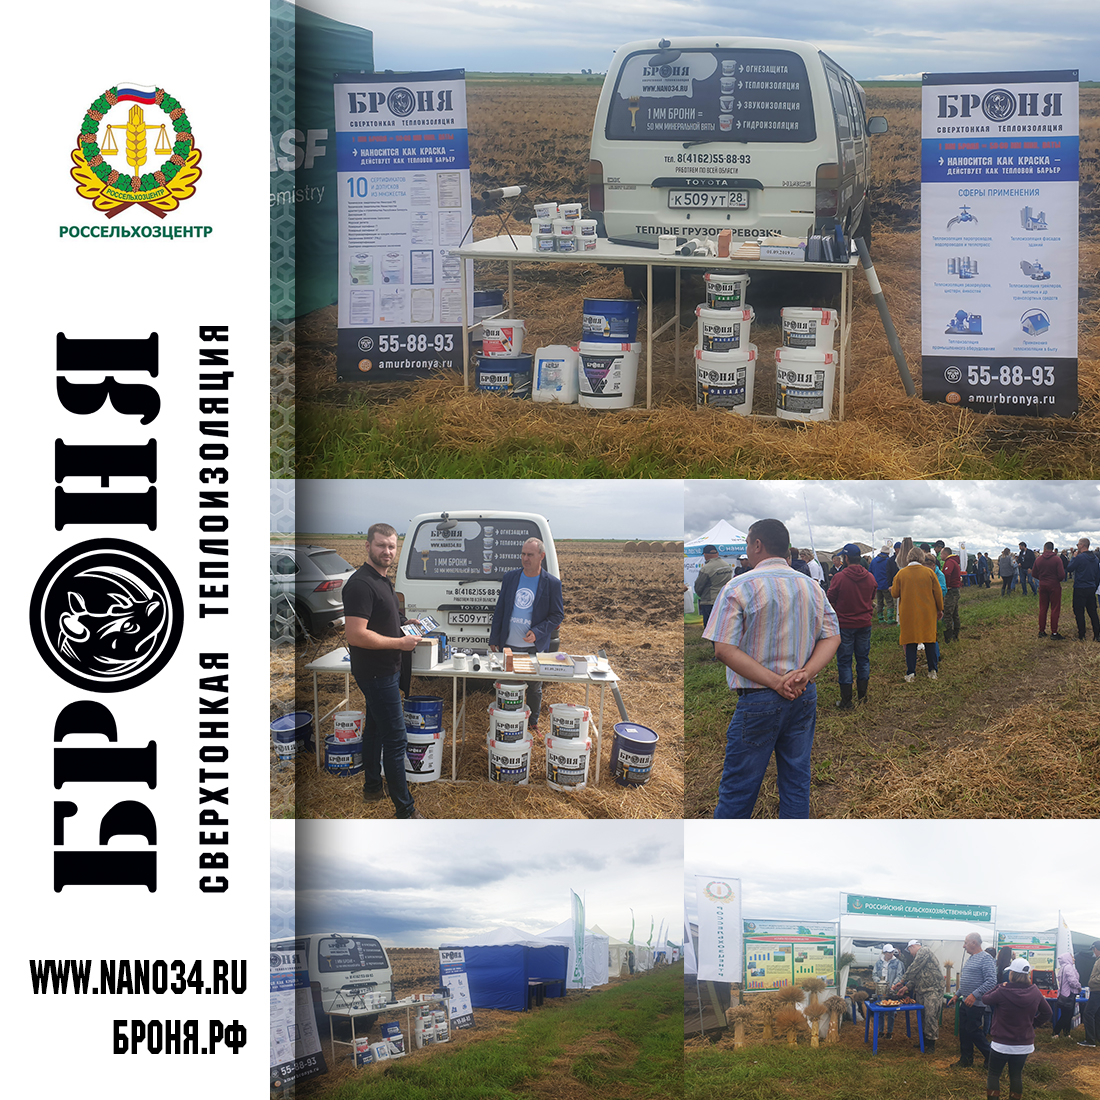 Participation of the company "Bronya" in the exhibition of innovations in agriculture, Amur region (photo)